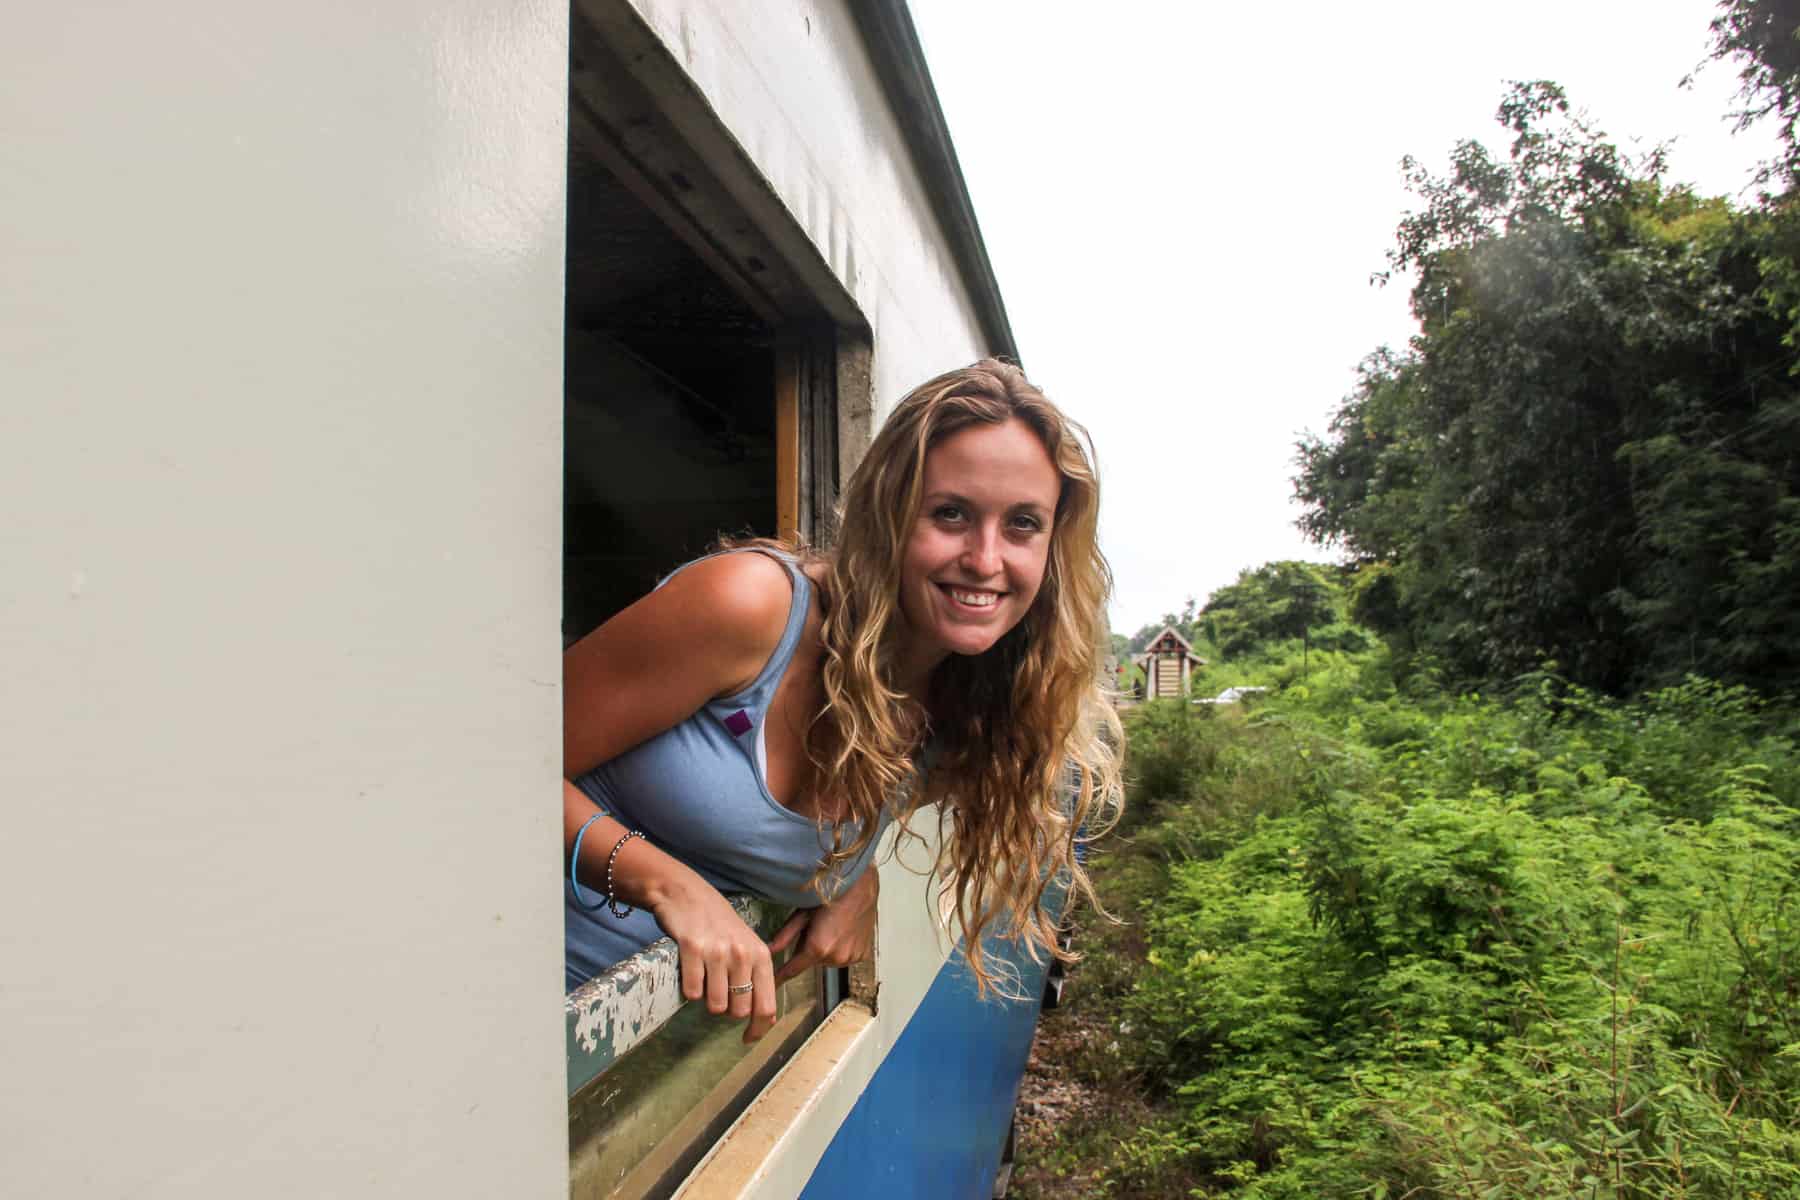 A woman leans out of a white and blue train carriage window as it journeys through rural Thai countryside